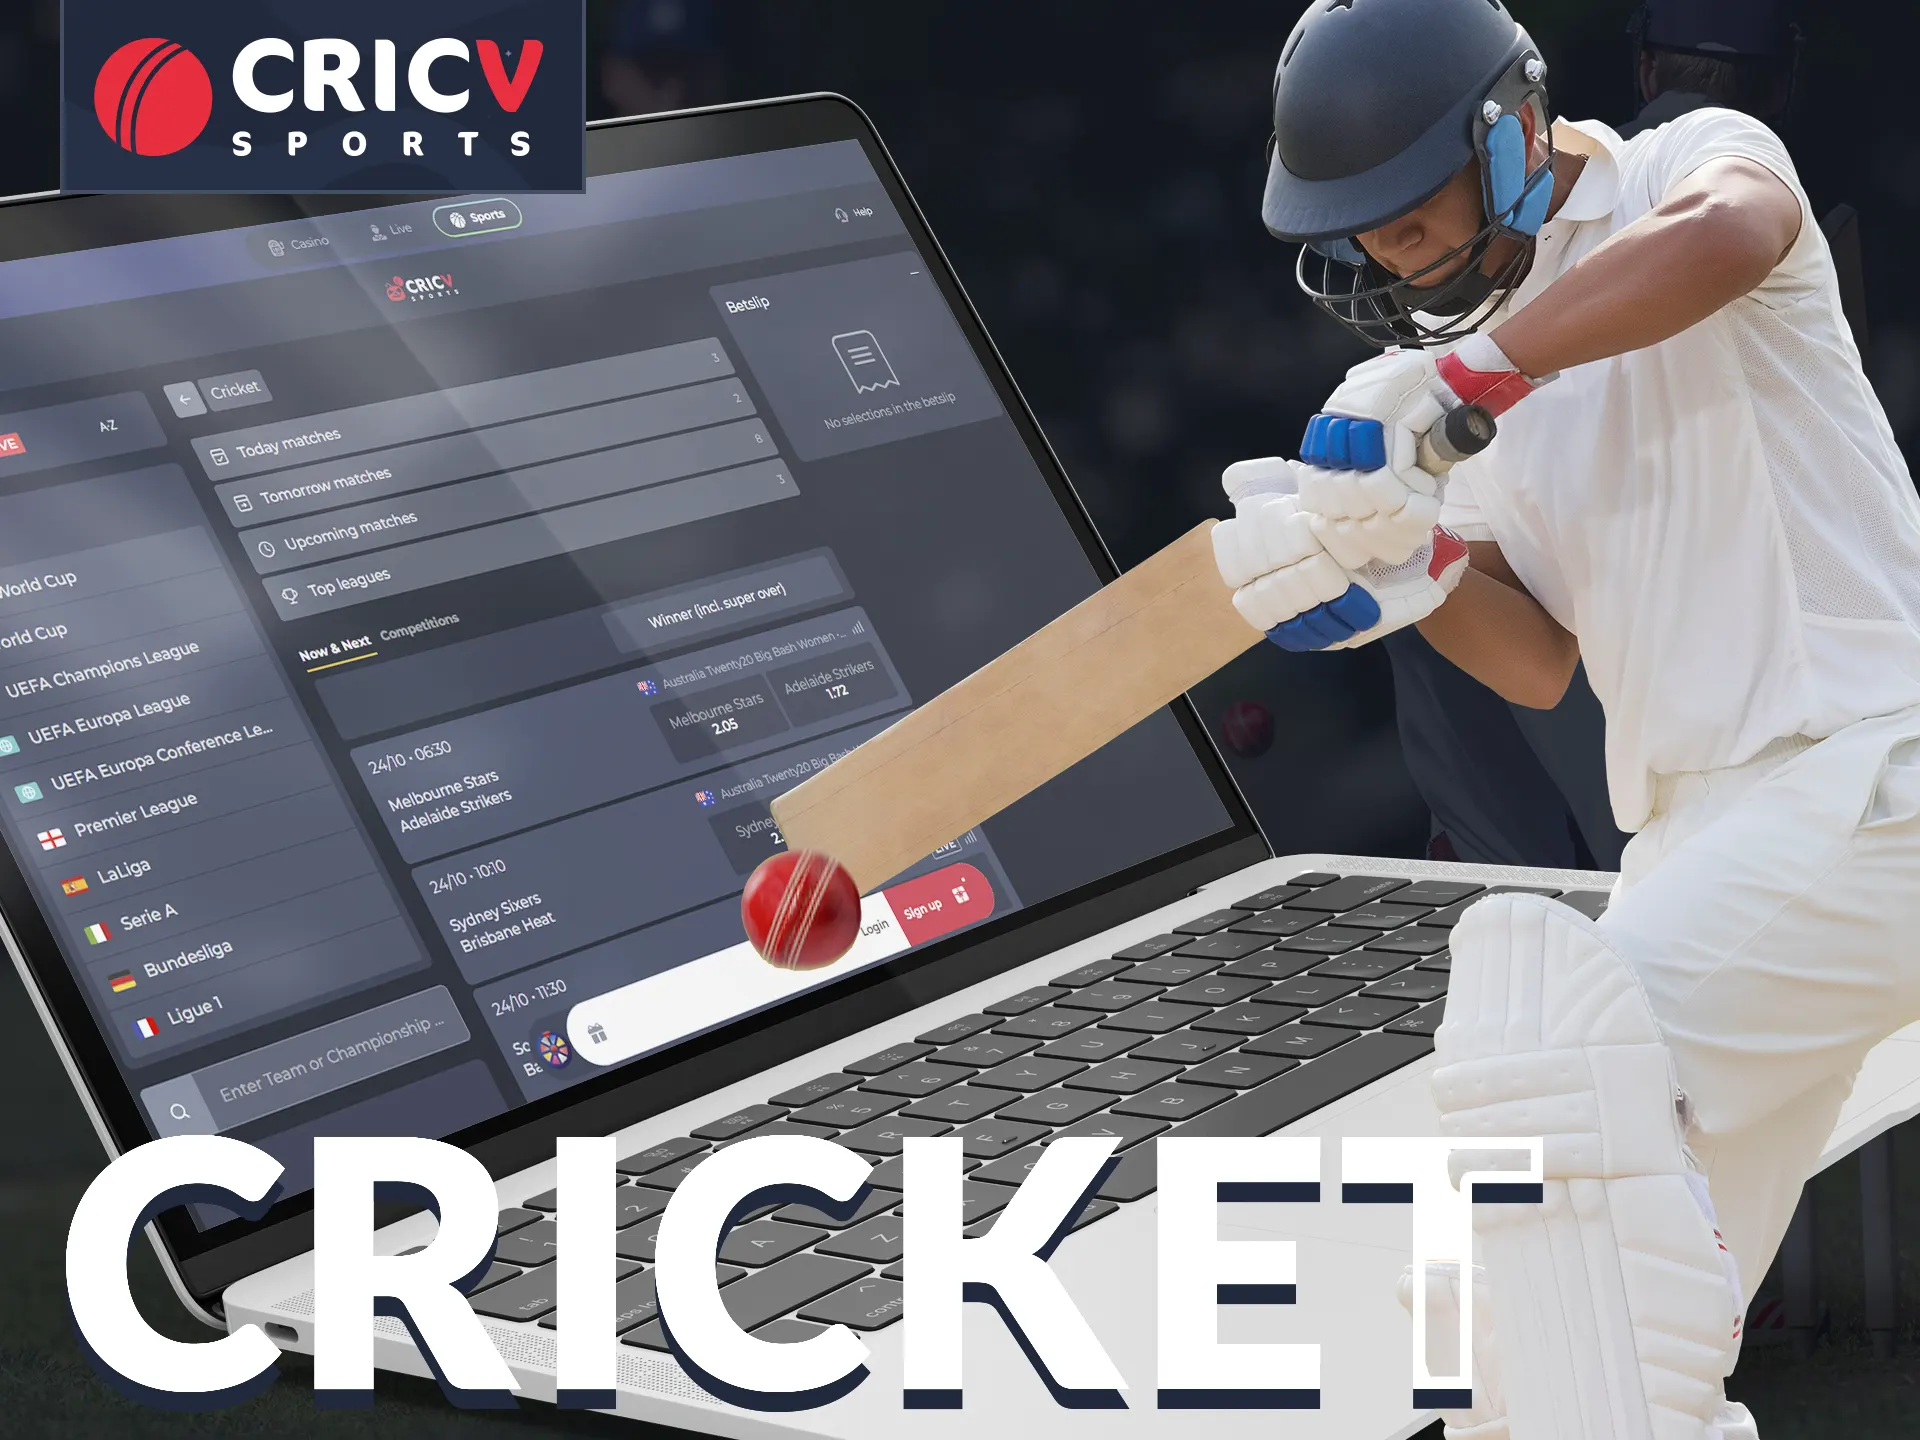 Bet on cricket with Cricv.